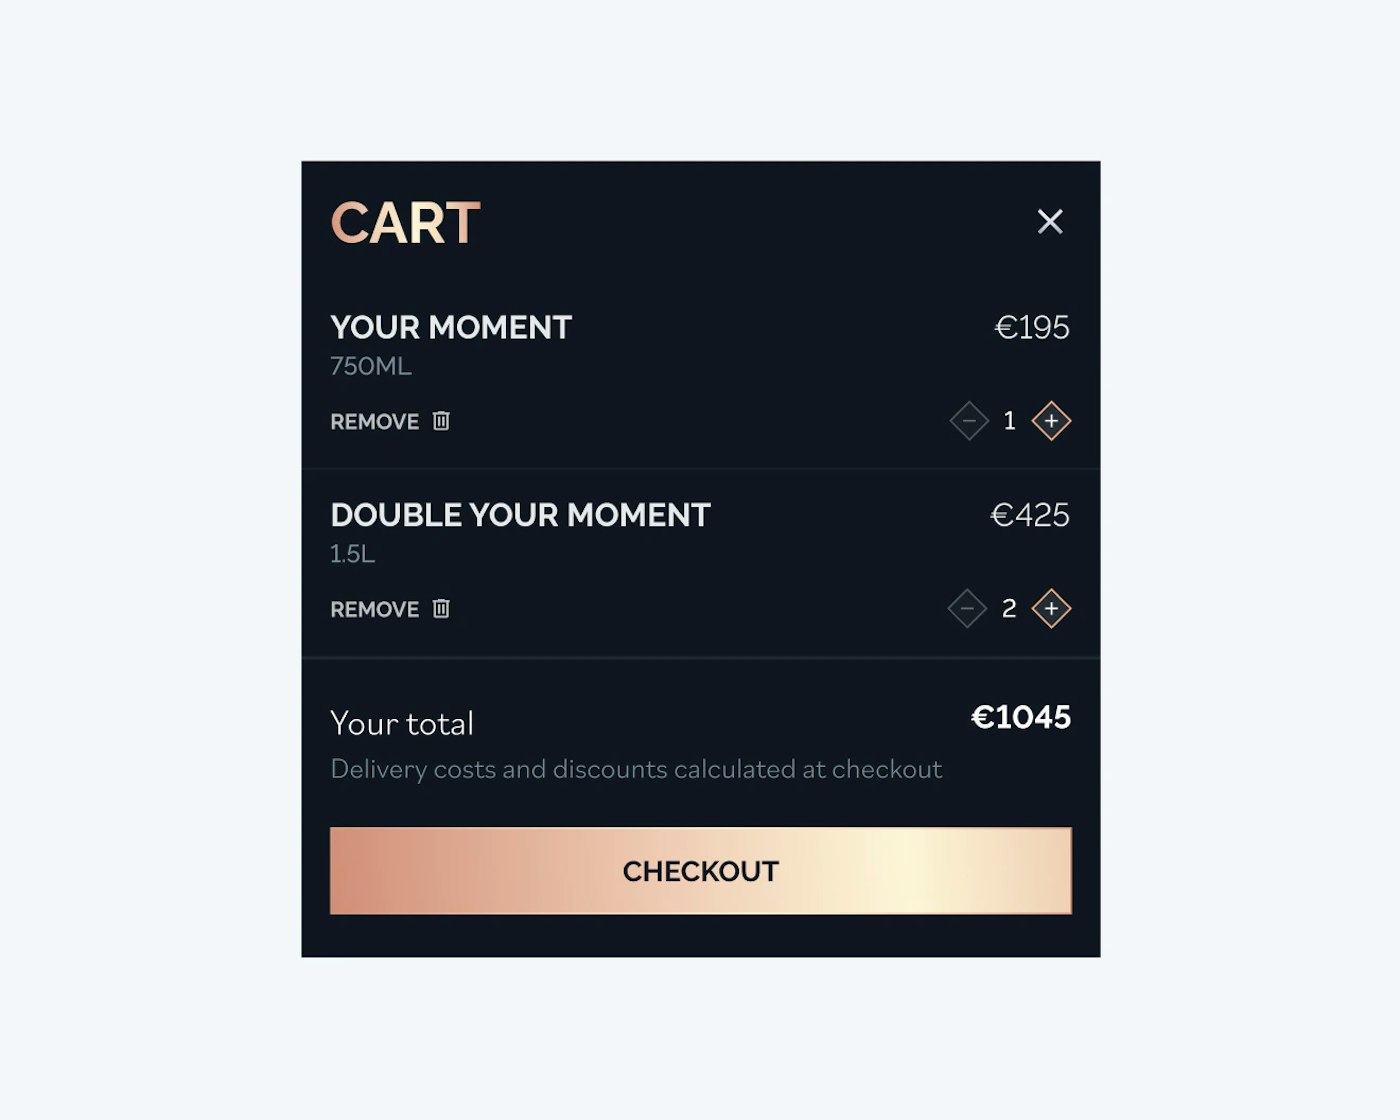 Screenshot of an online shopping cart with two products, 'YOUR MOMENT 750ML' and 'DOUBLE YOUR MOMENT 1.5L', both with quantity options and remove buttons. The cart displays a subtotal and a 'CHECKOUT' button, with a note that delivery costs and discounts are calculated at checkout.